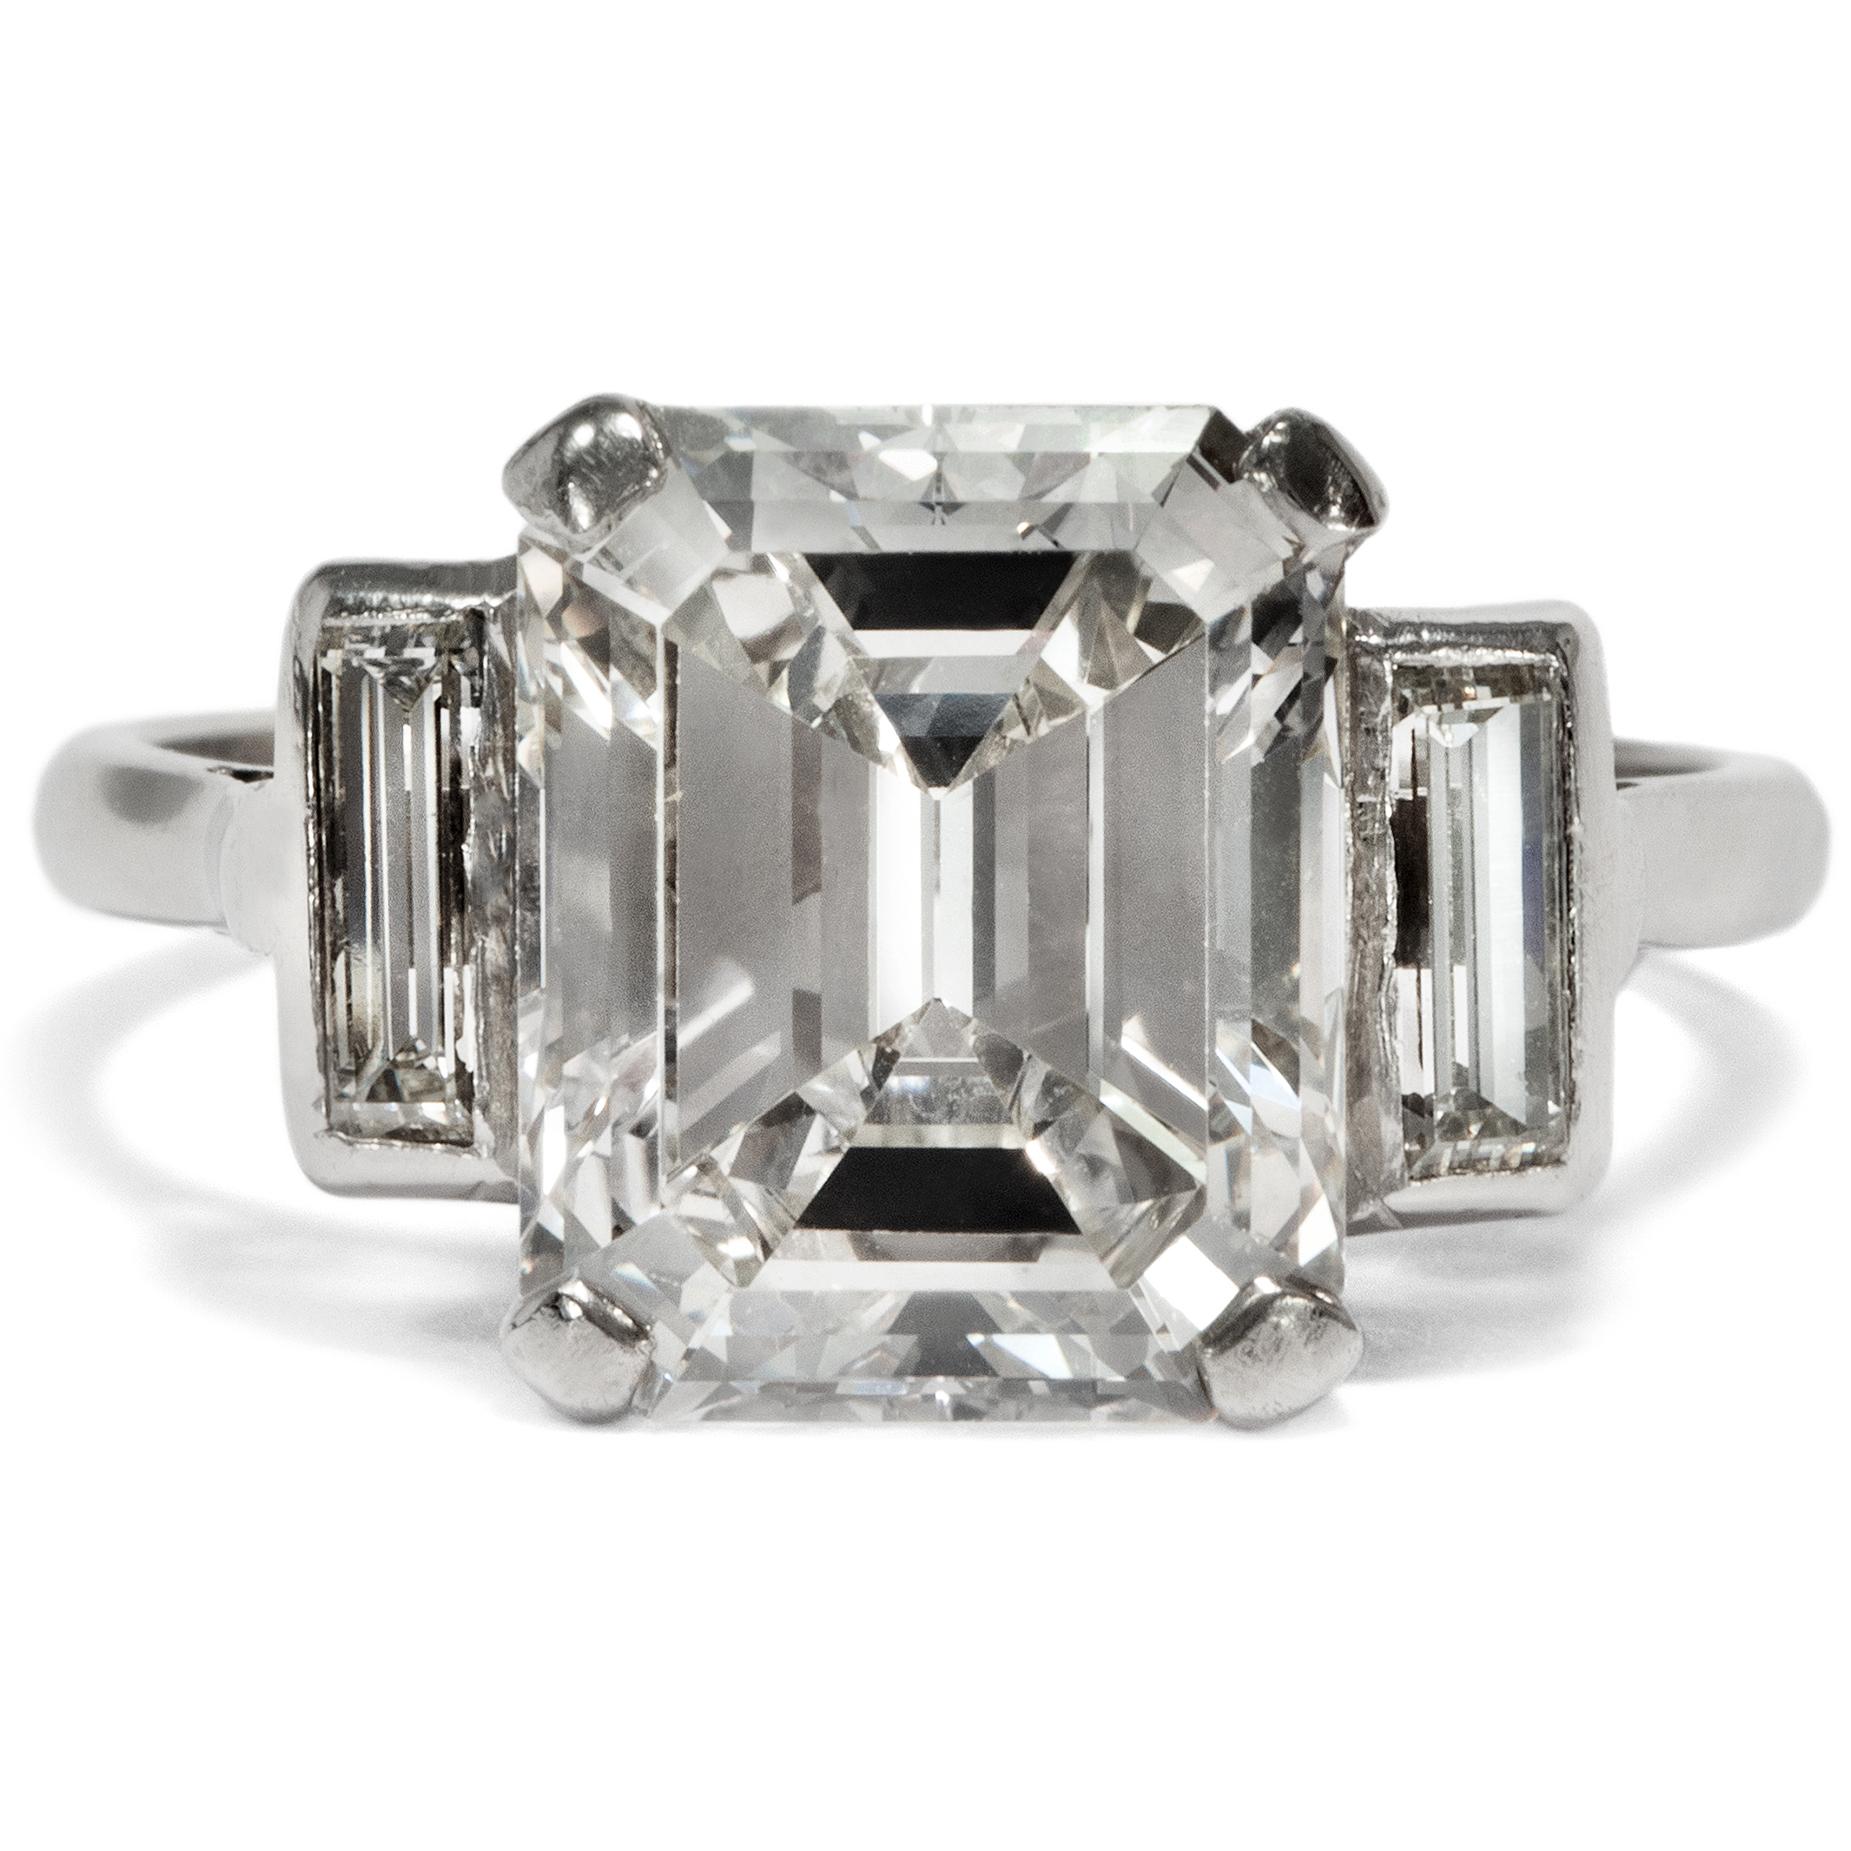 It is rare to find antique engagement rings with diamonds of this size: this ring, made entirely of platinum, holds an emerald-cut diamond of just over 5 carats. The diamond has been graded by a renowned gemological institute as being of Top